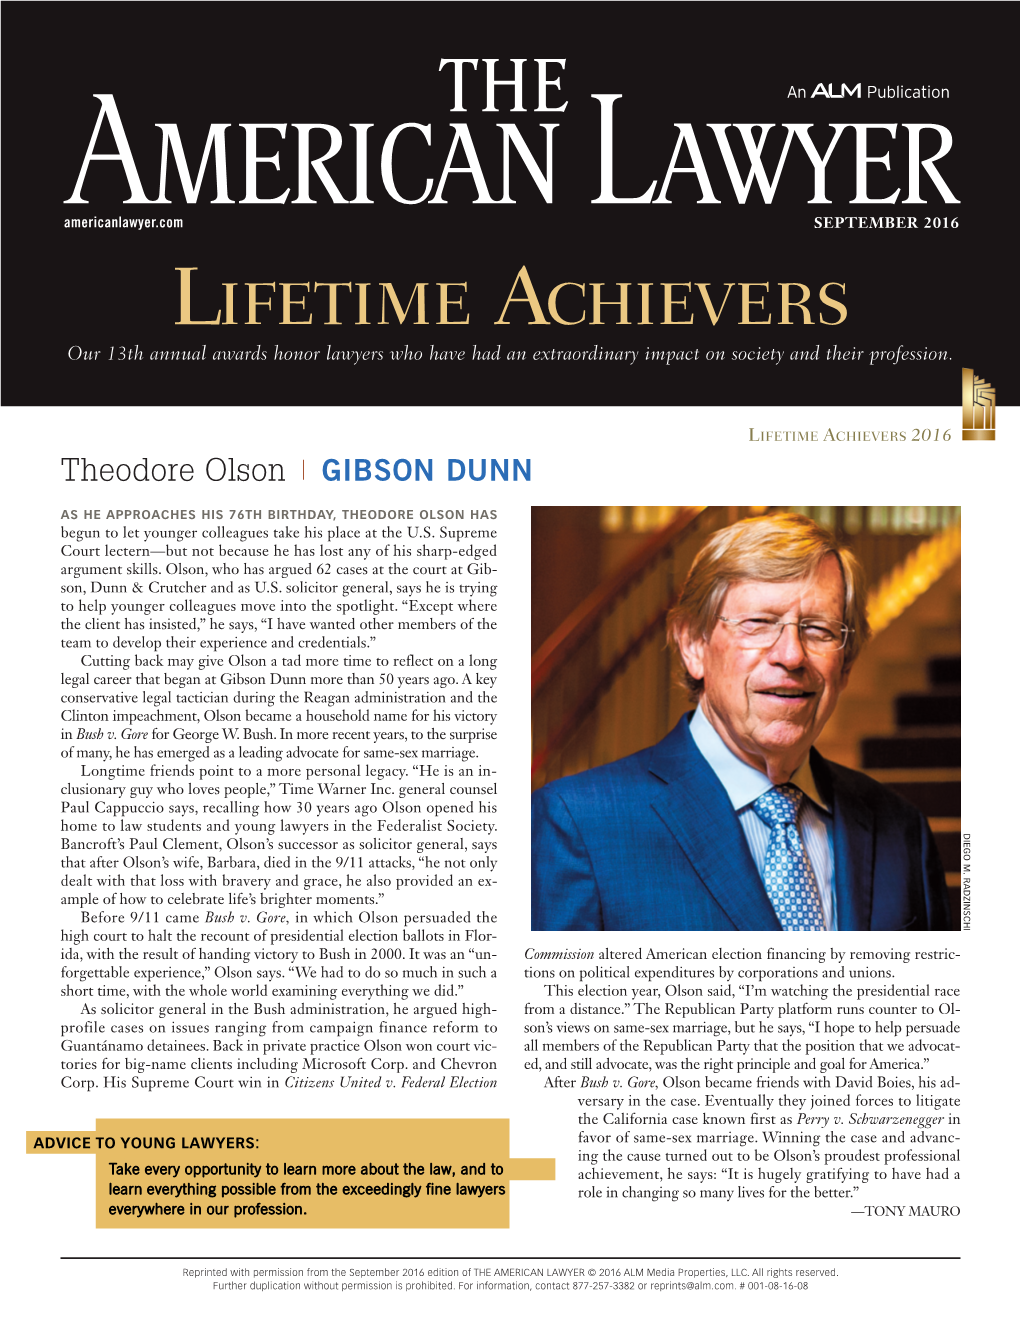 Lifetime Achievers Our 13Th Annual Awards Honor Lawyers Who Have Had an Extraordinary Impact on Society and Their Profession